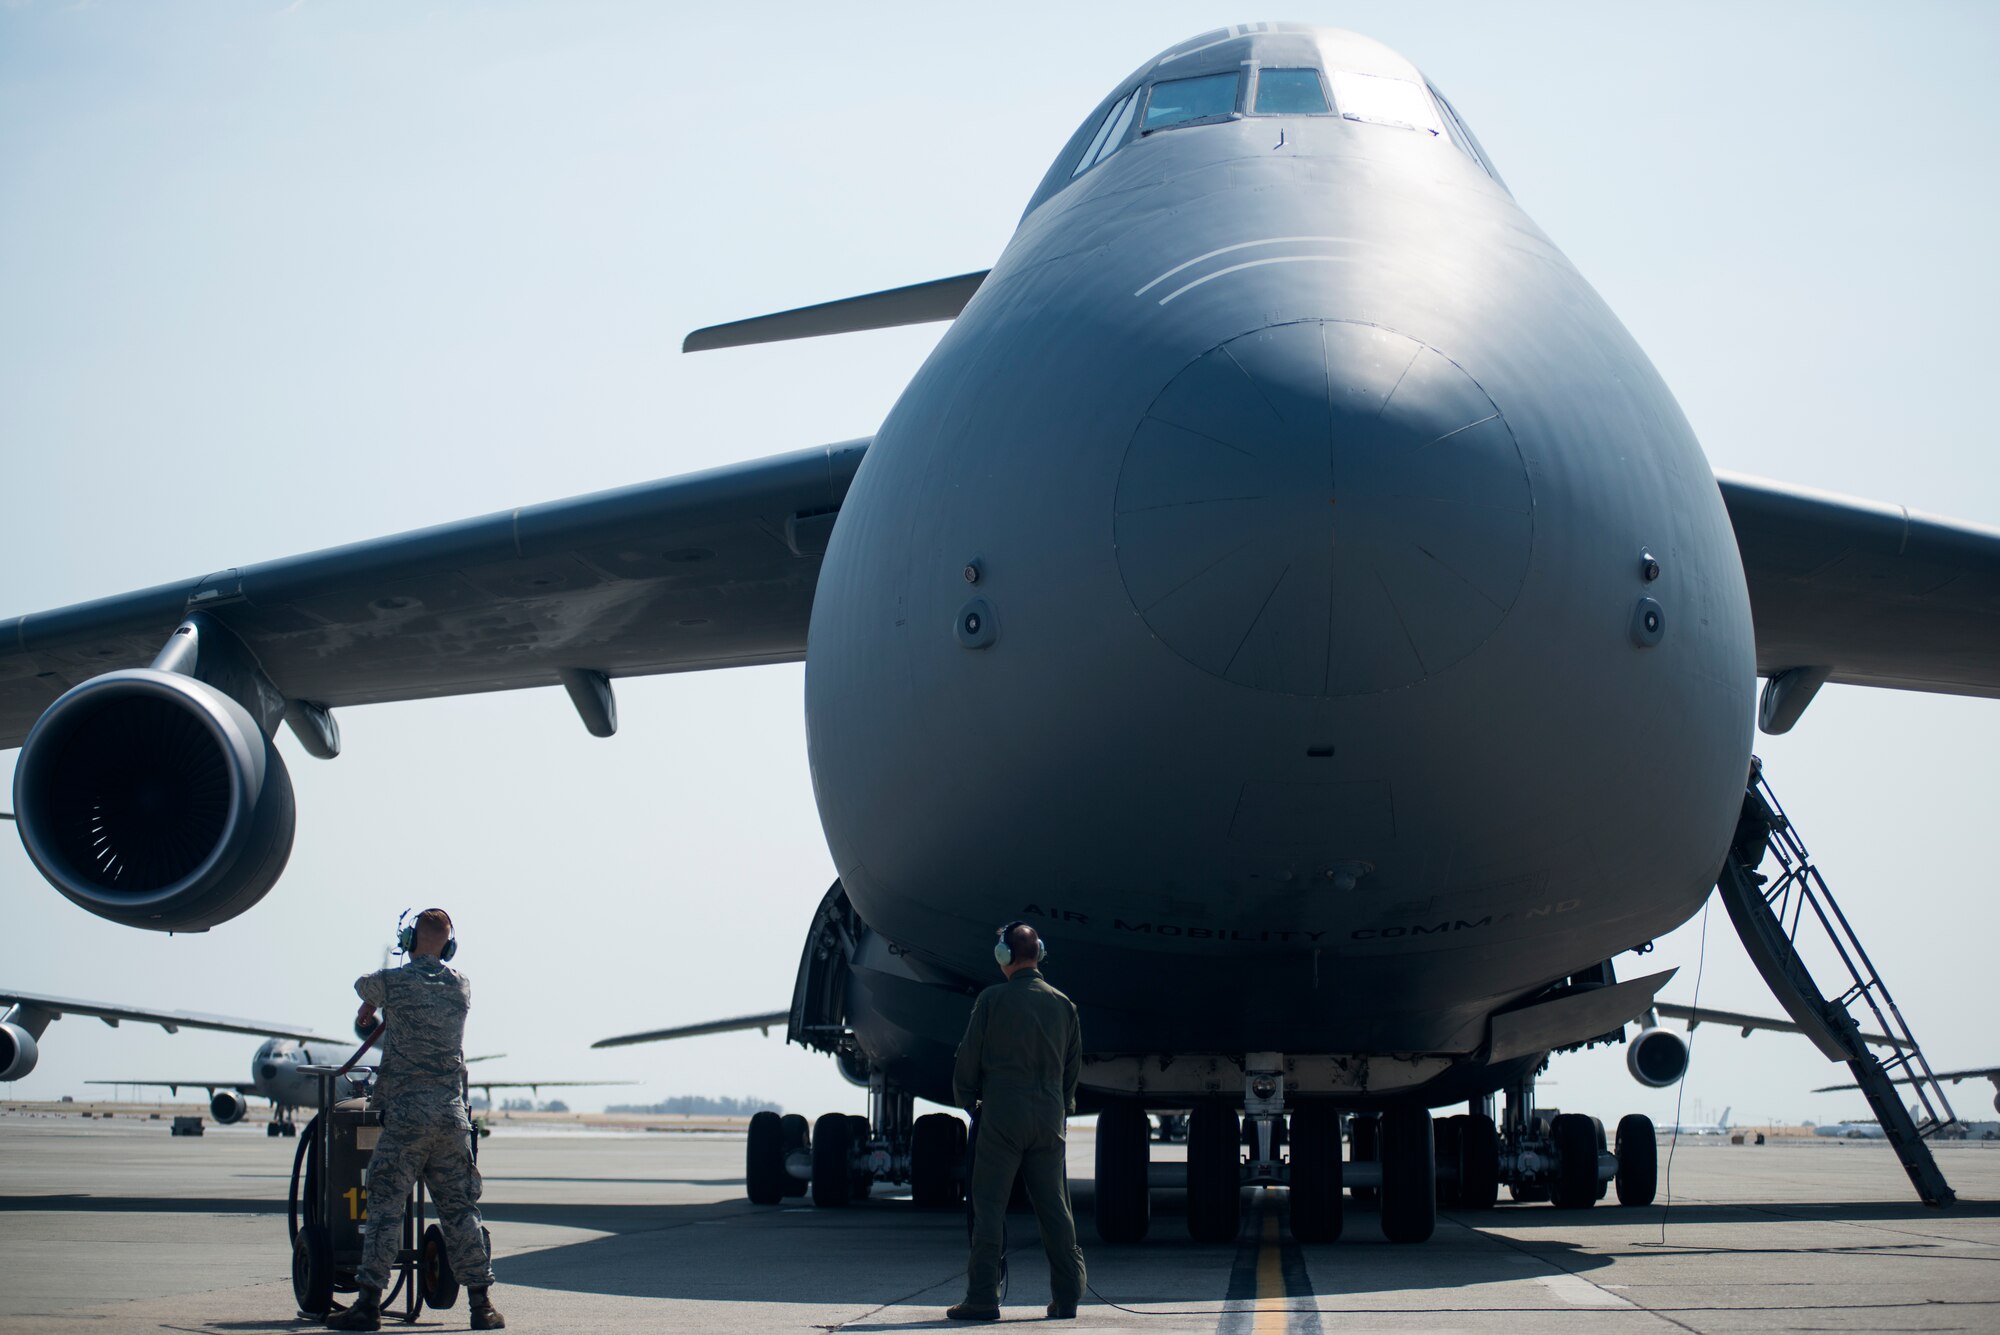 Crew chiefs for the 349th and 60th Aircraft Maintenance Squadrons stand by as the final checks on a C-5M Super Galaxy are completed prior to its launch on Aug. 11, 2018, at Travis Air Force Base, Calif. The 349th and 60th AMXS work together to launch aircraft in a seemless active duty and Air Force Reserve integration.